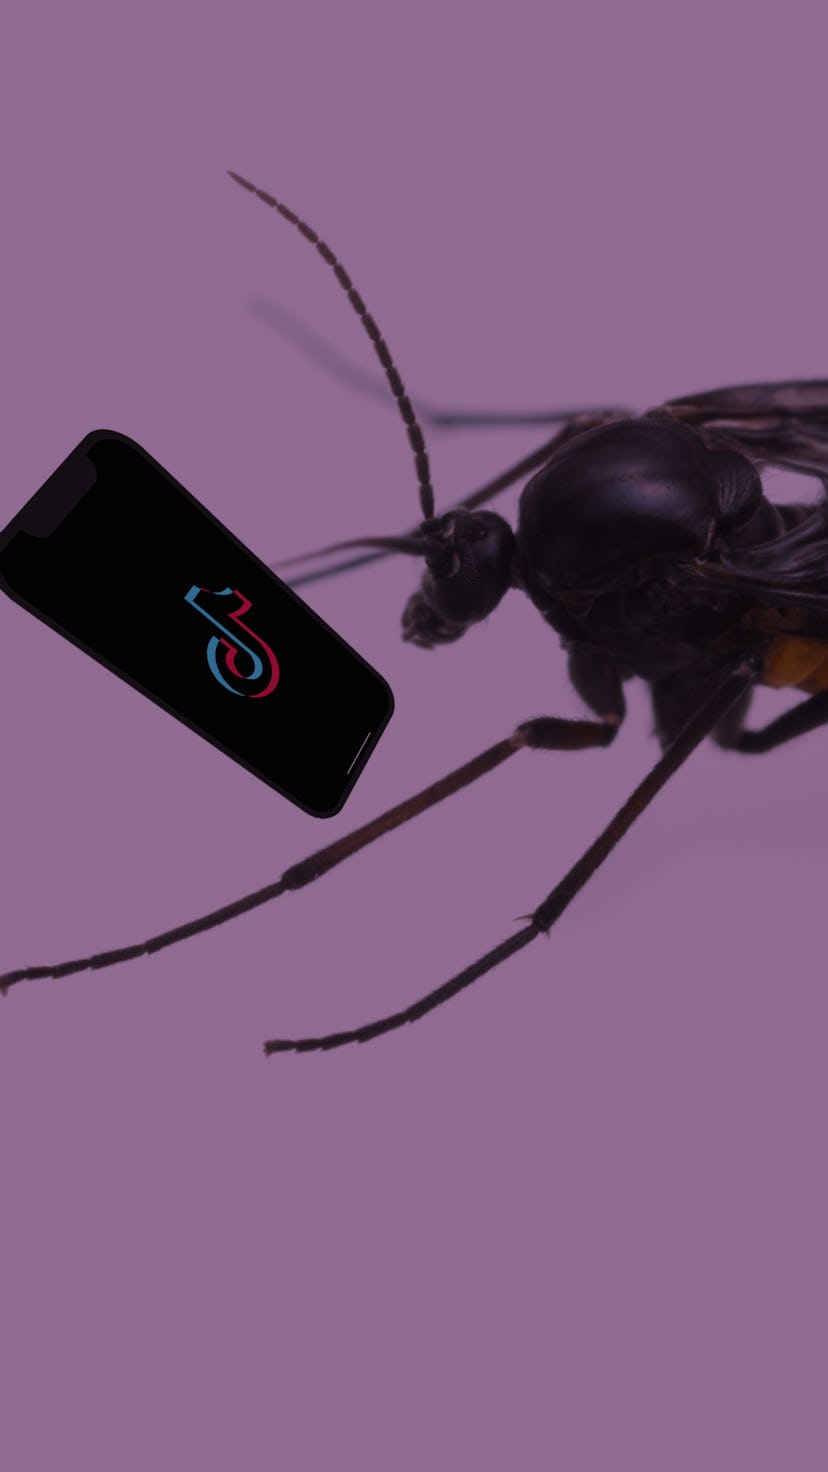 Photo illustration of a gnat looking at TikTok on its phone